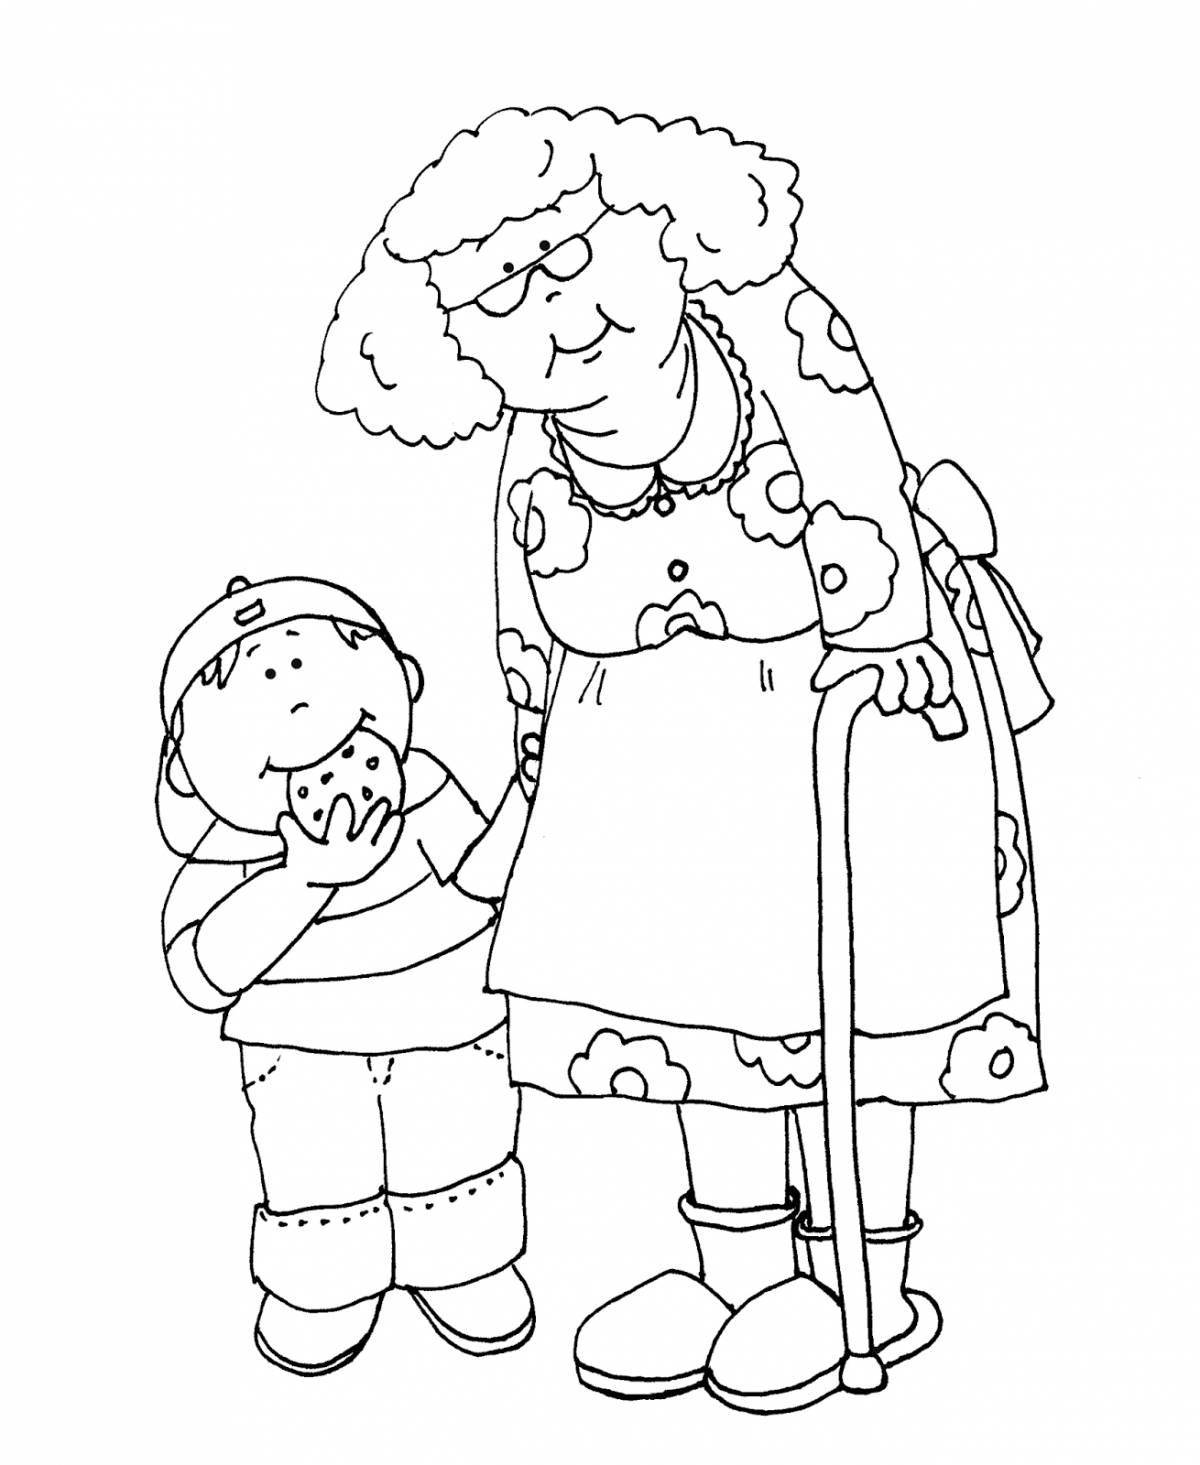 Charming grandmother and granddaughter coloring book